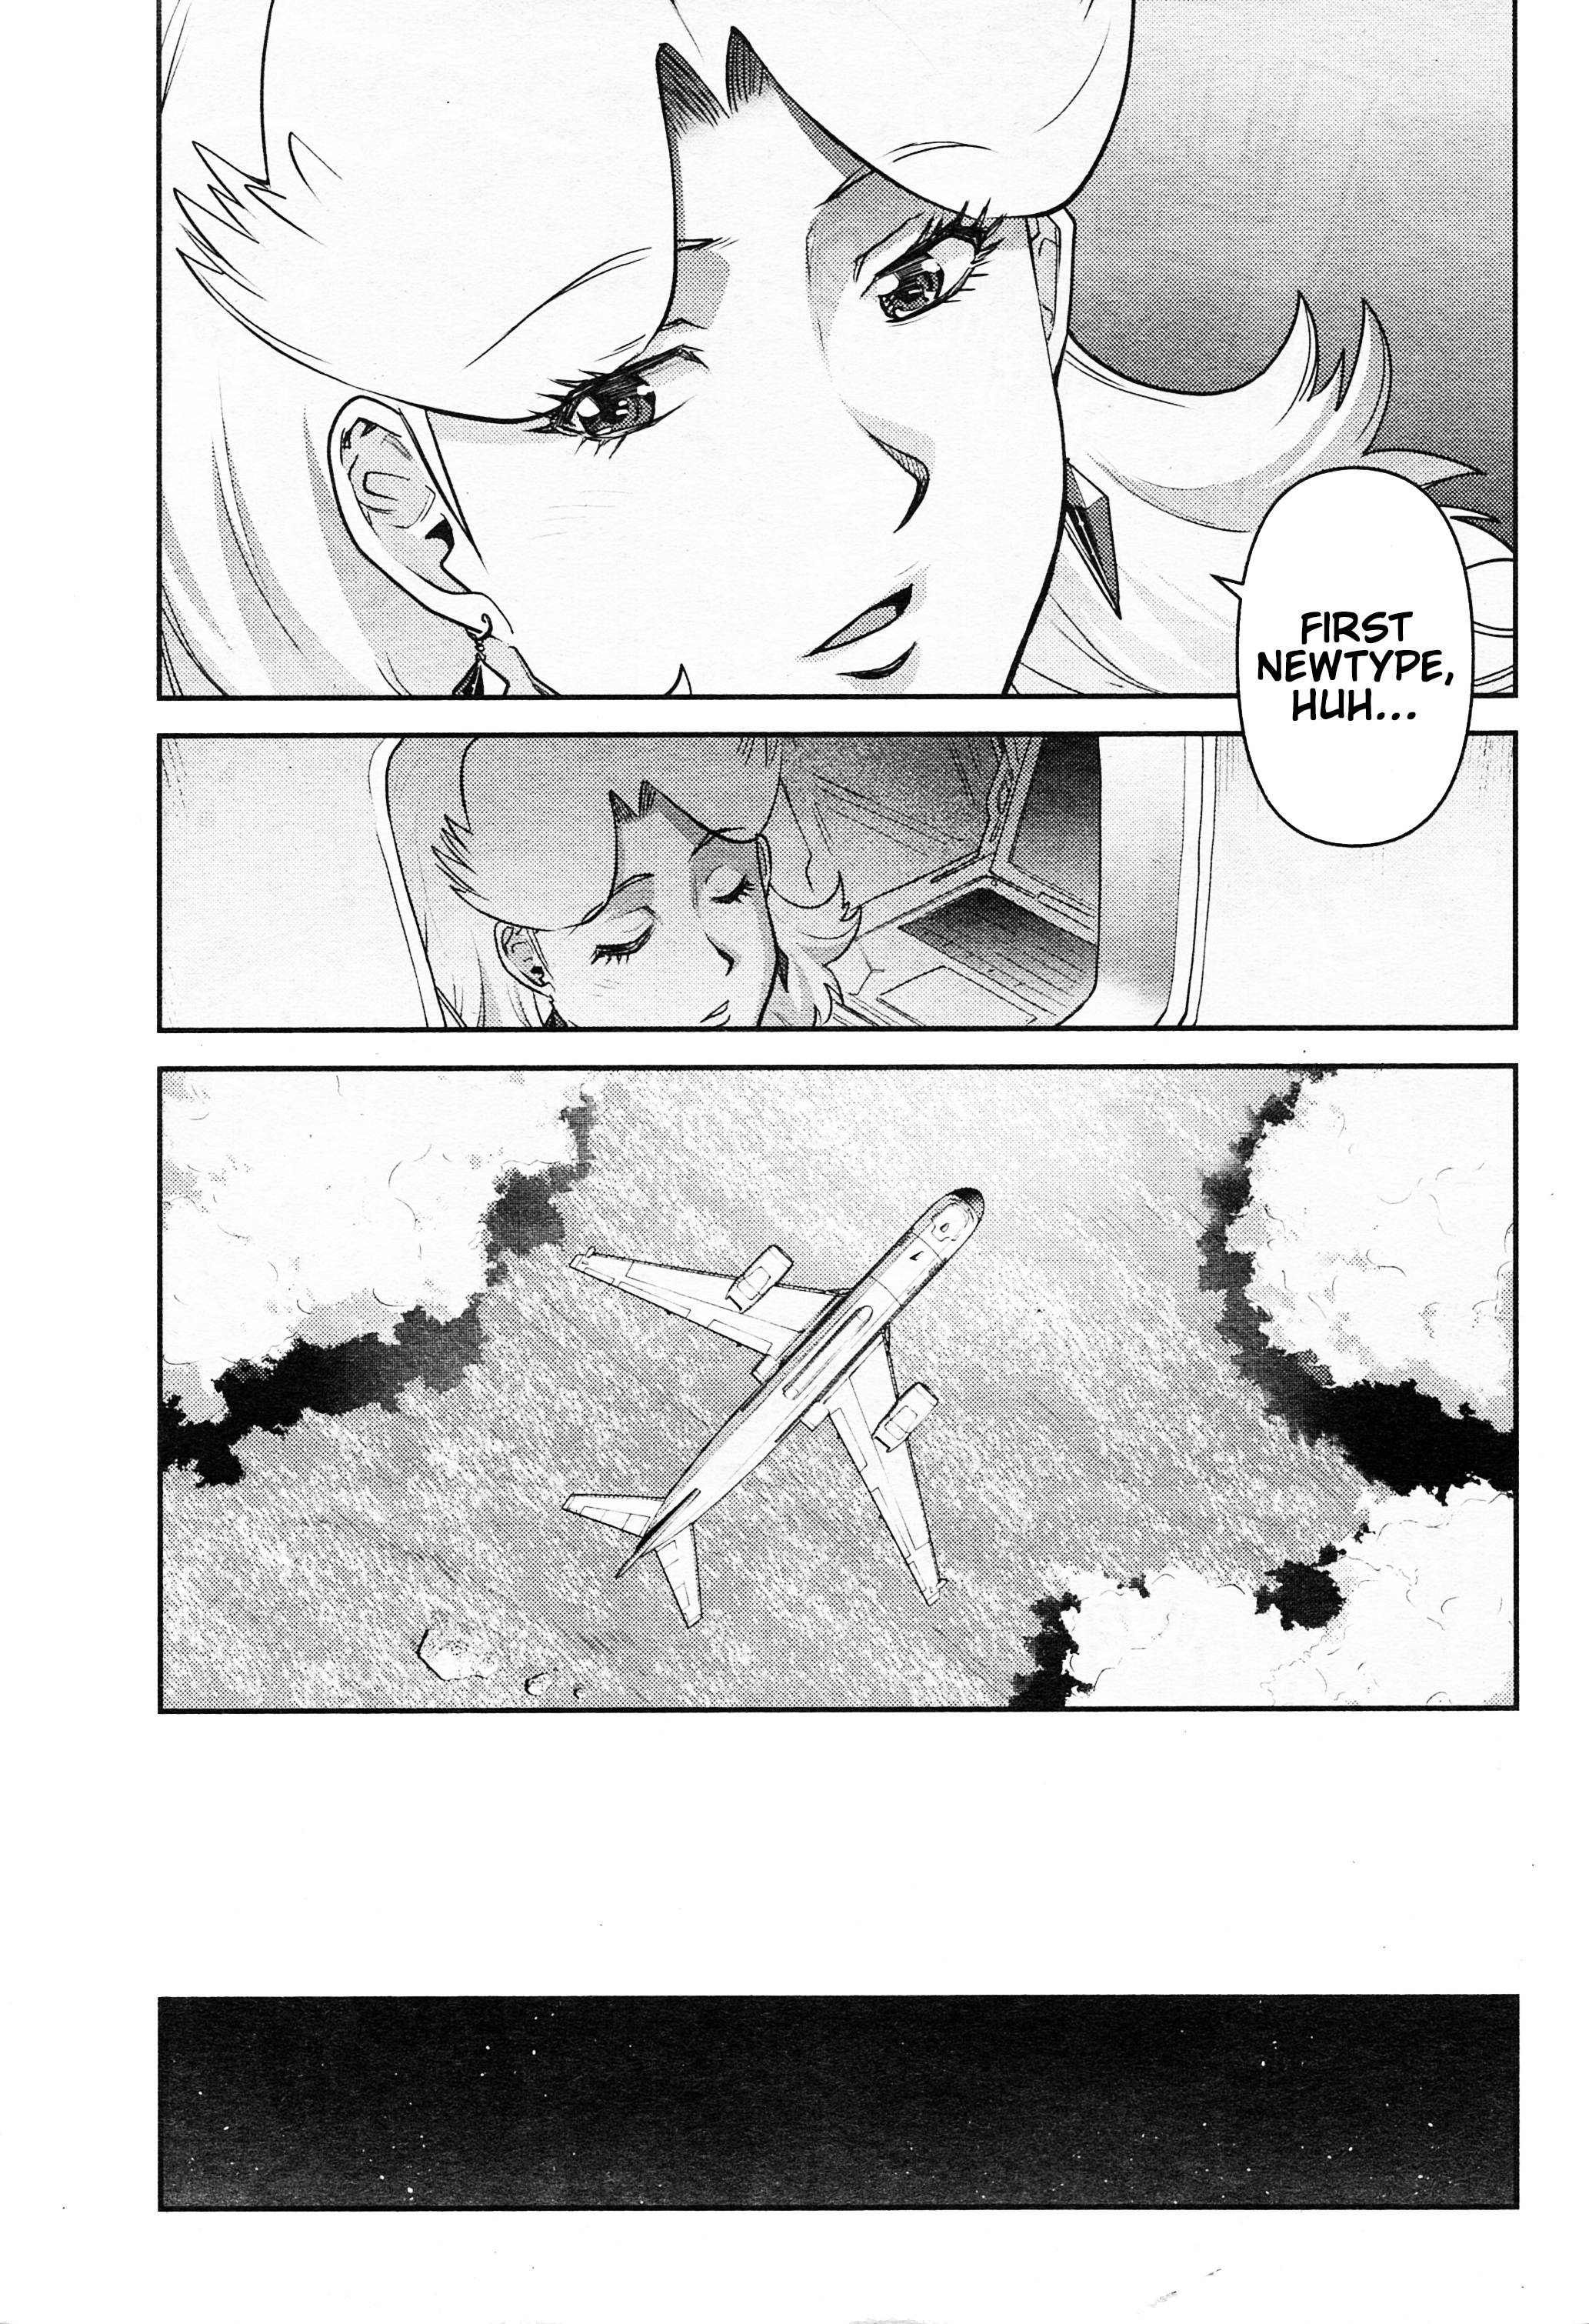 Mobile Suit Gundam Pulitzer - Amuro Ray Beyond The Aurora Vol.2 Chapter 11: Report 11: Drifting Memories - Picture 3